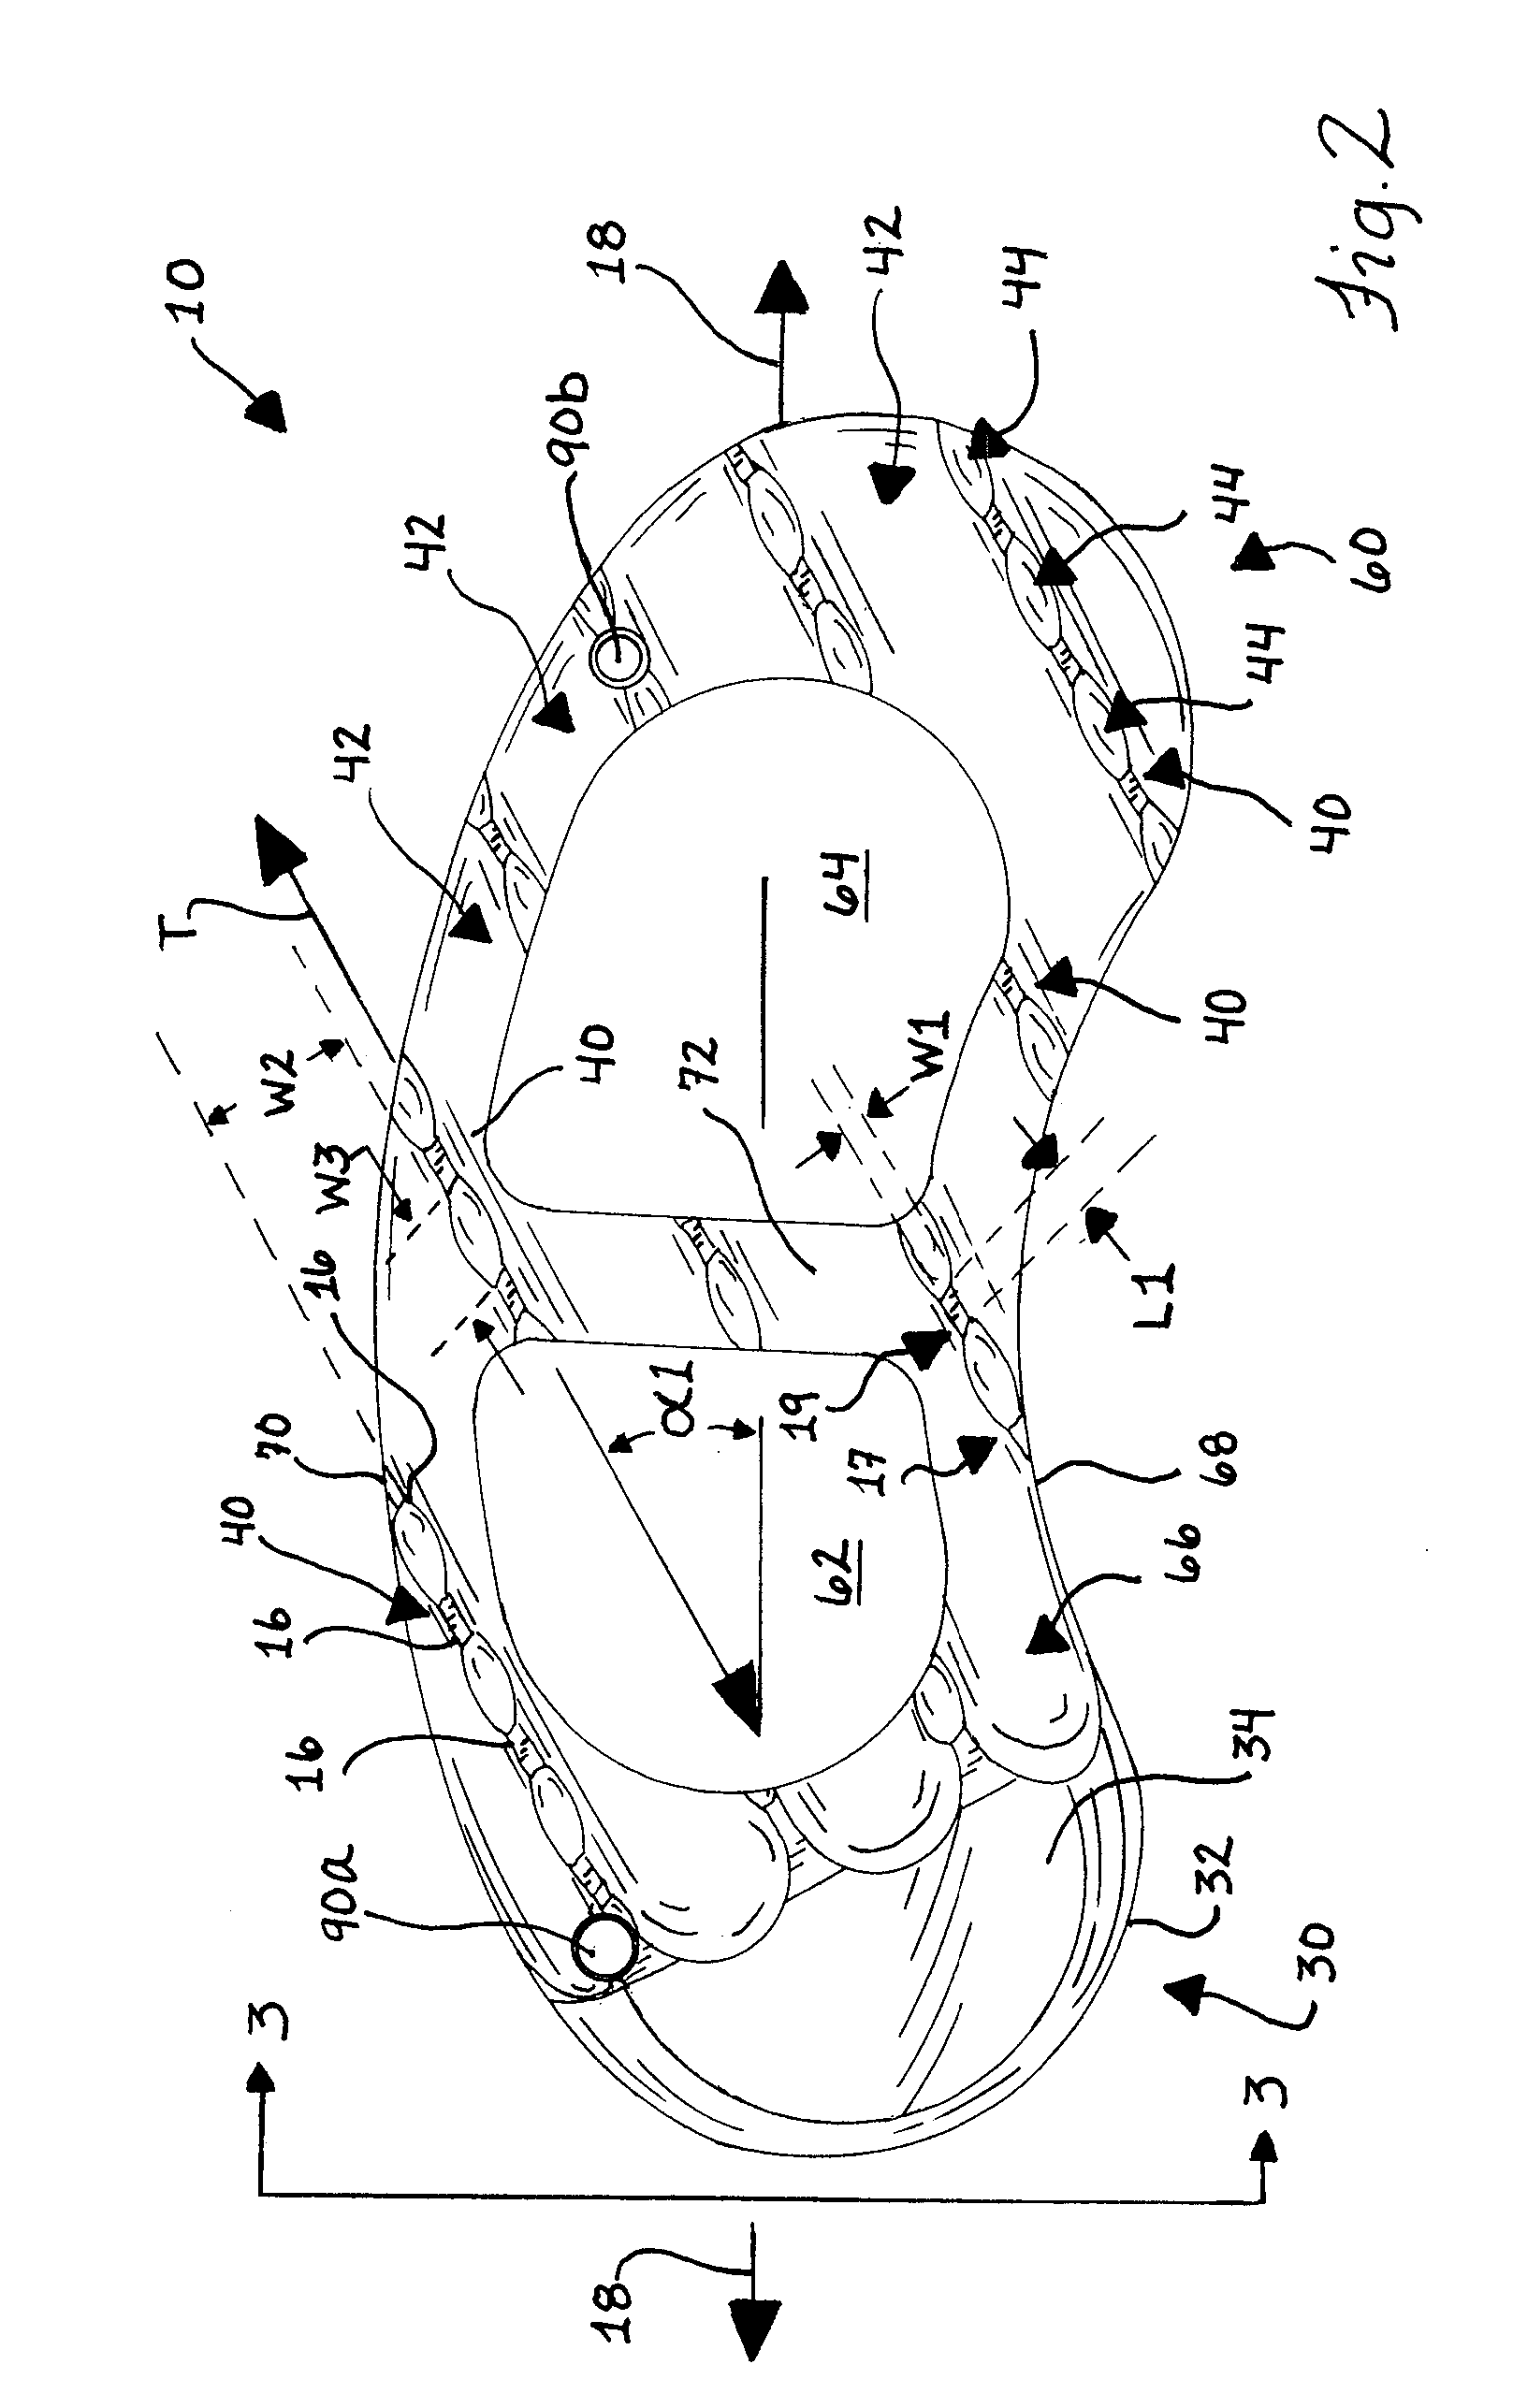 Spinal Stabilization Device and Methods